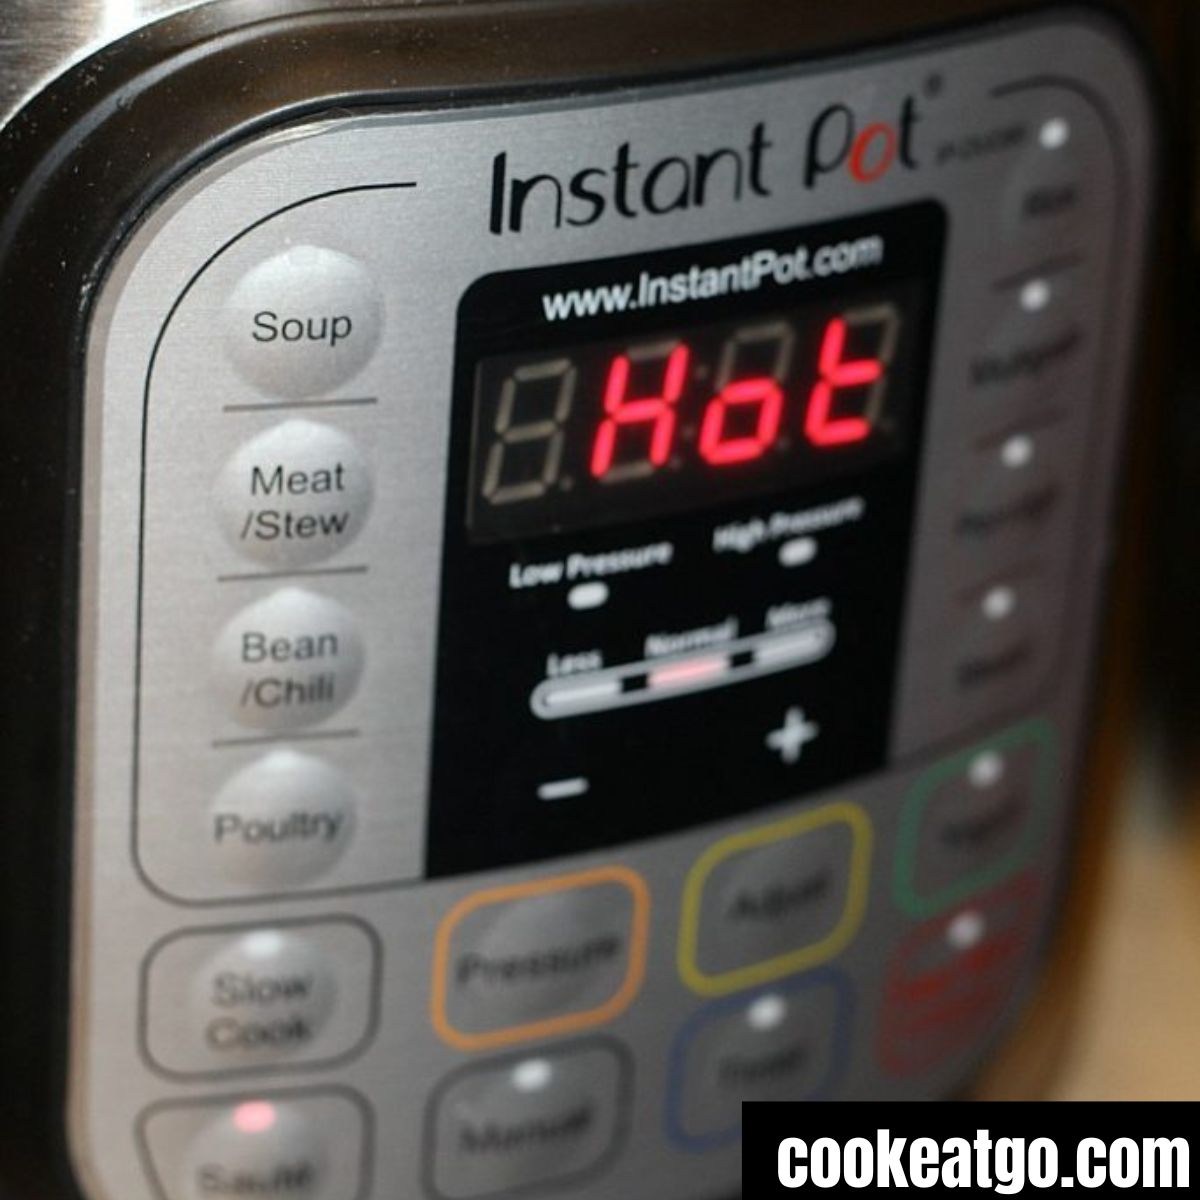 Instant pot with hot on the display